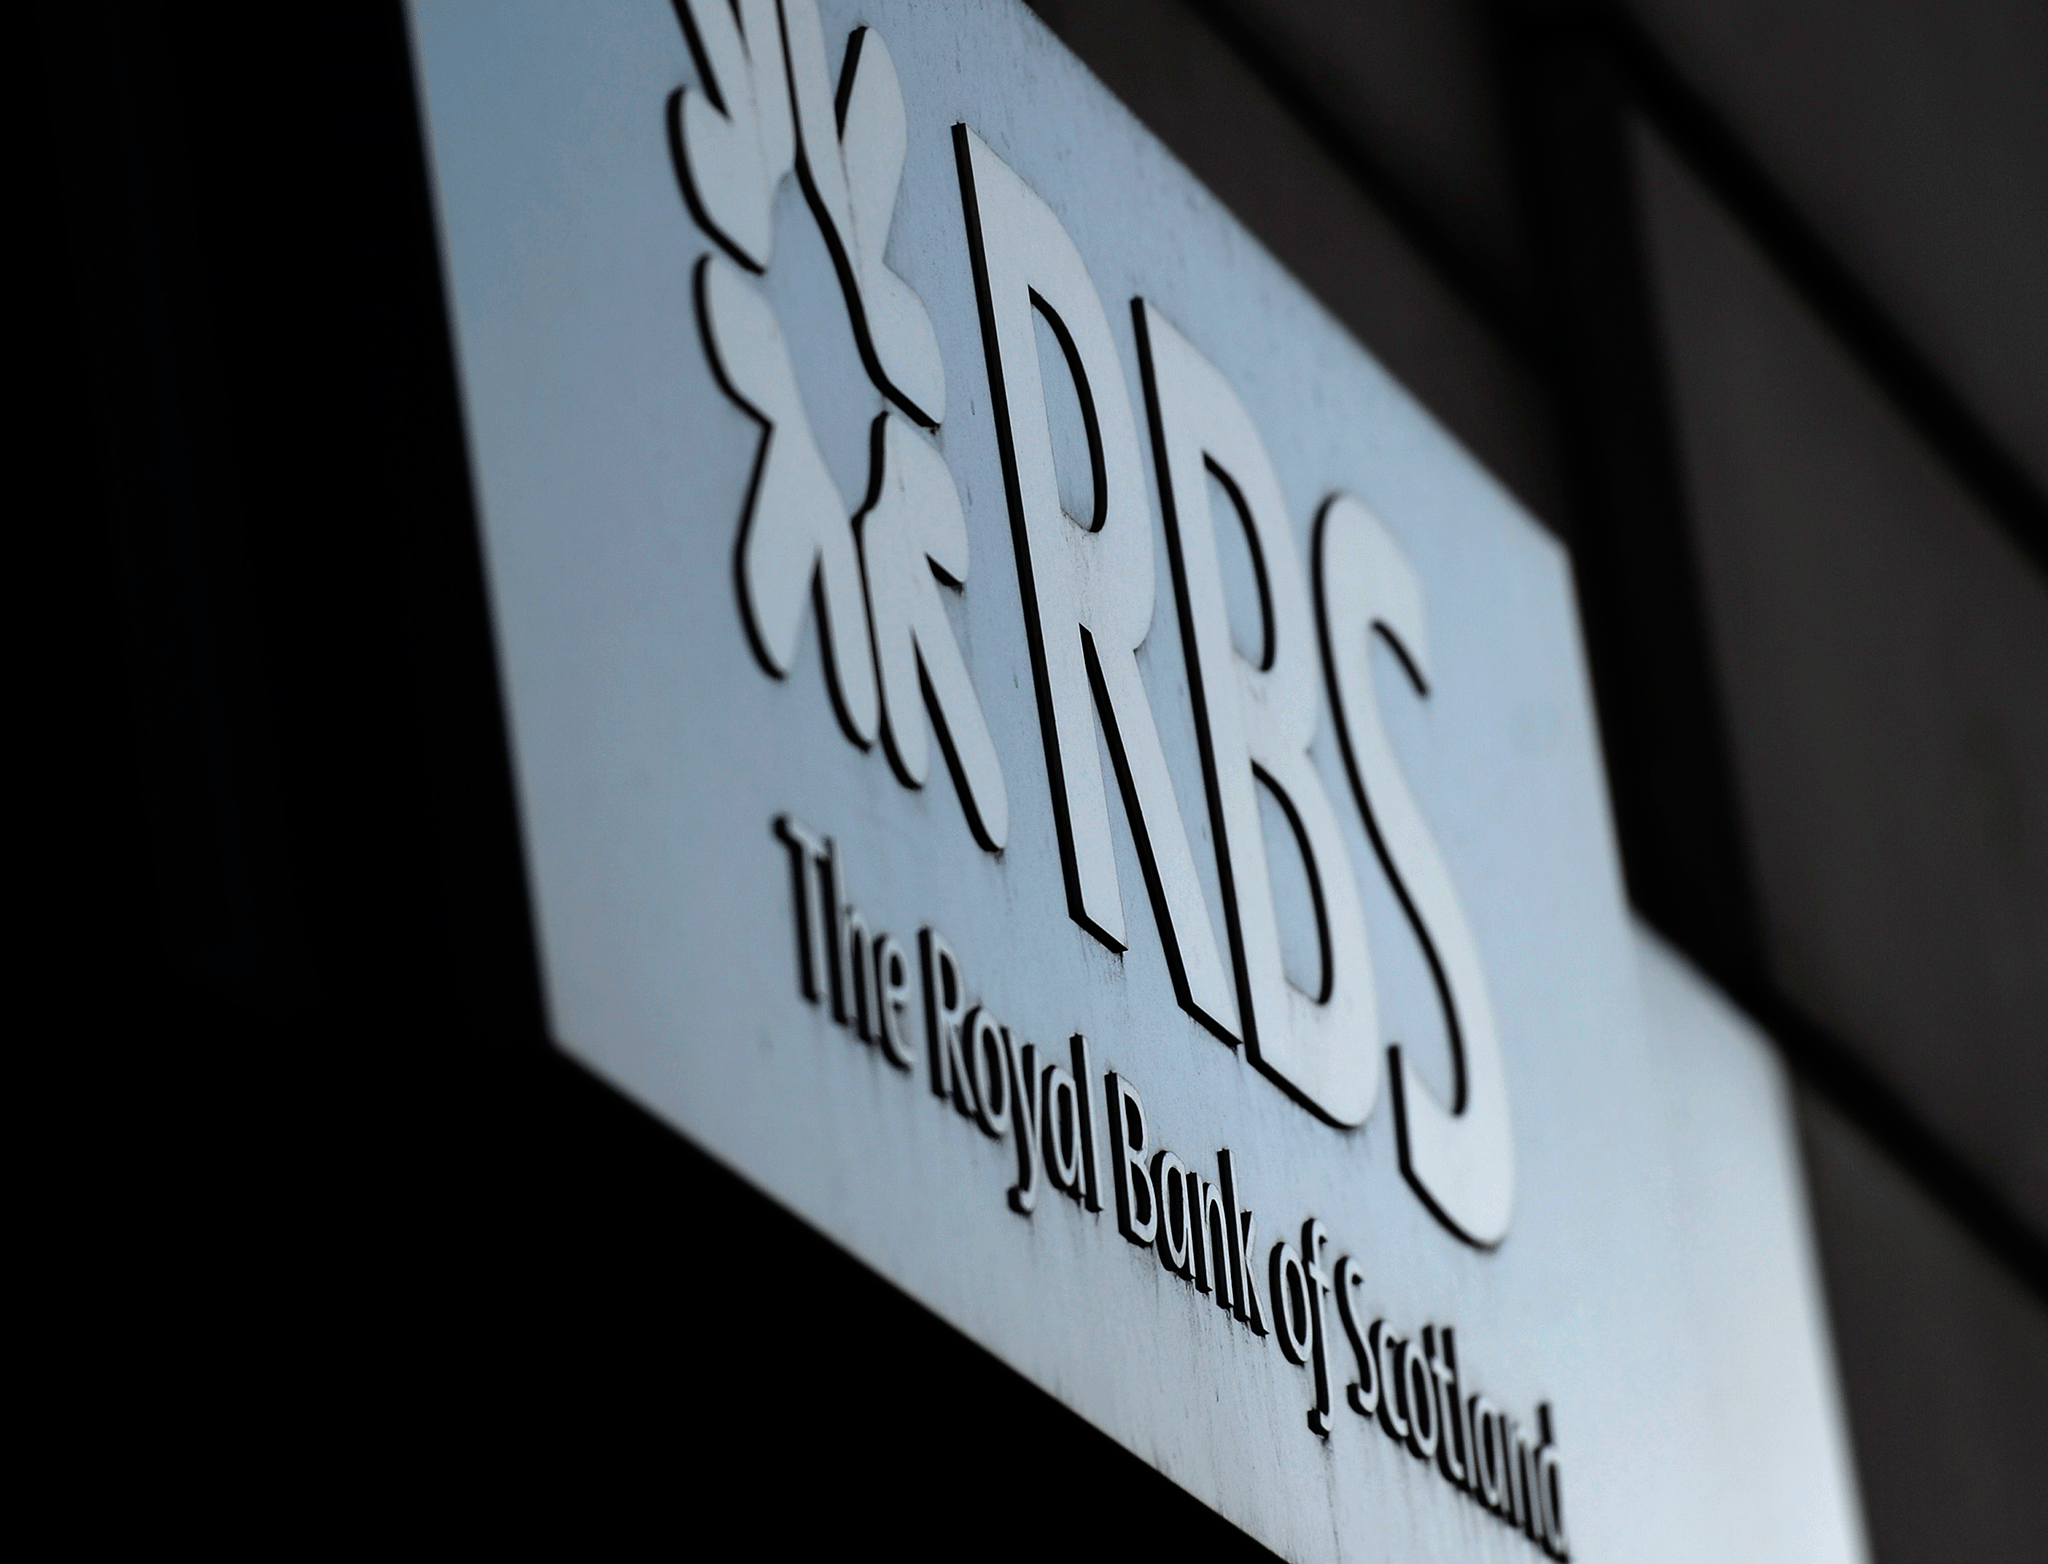 The City watchdog is resisting publication of a 'skilled person's' report into RBS